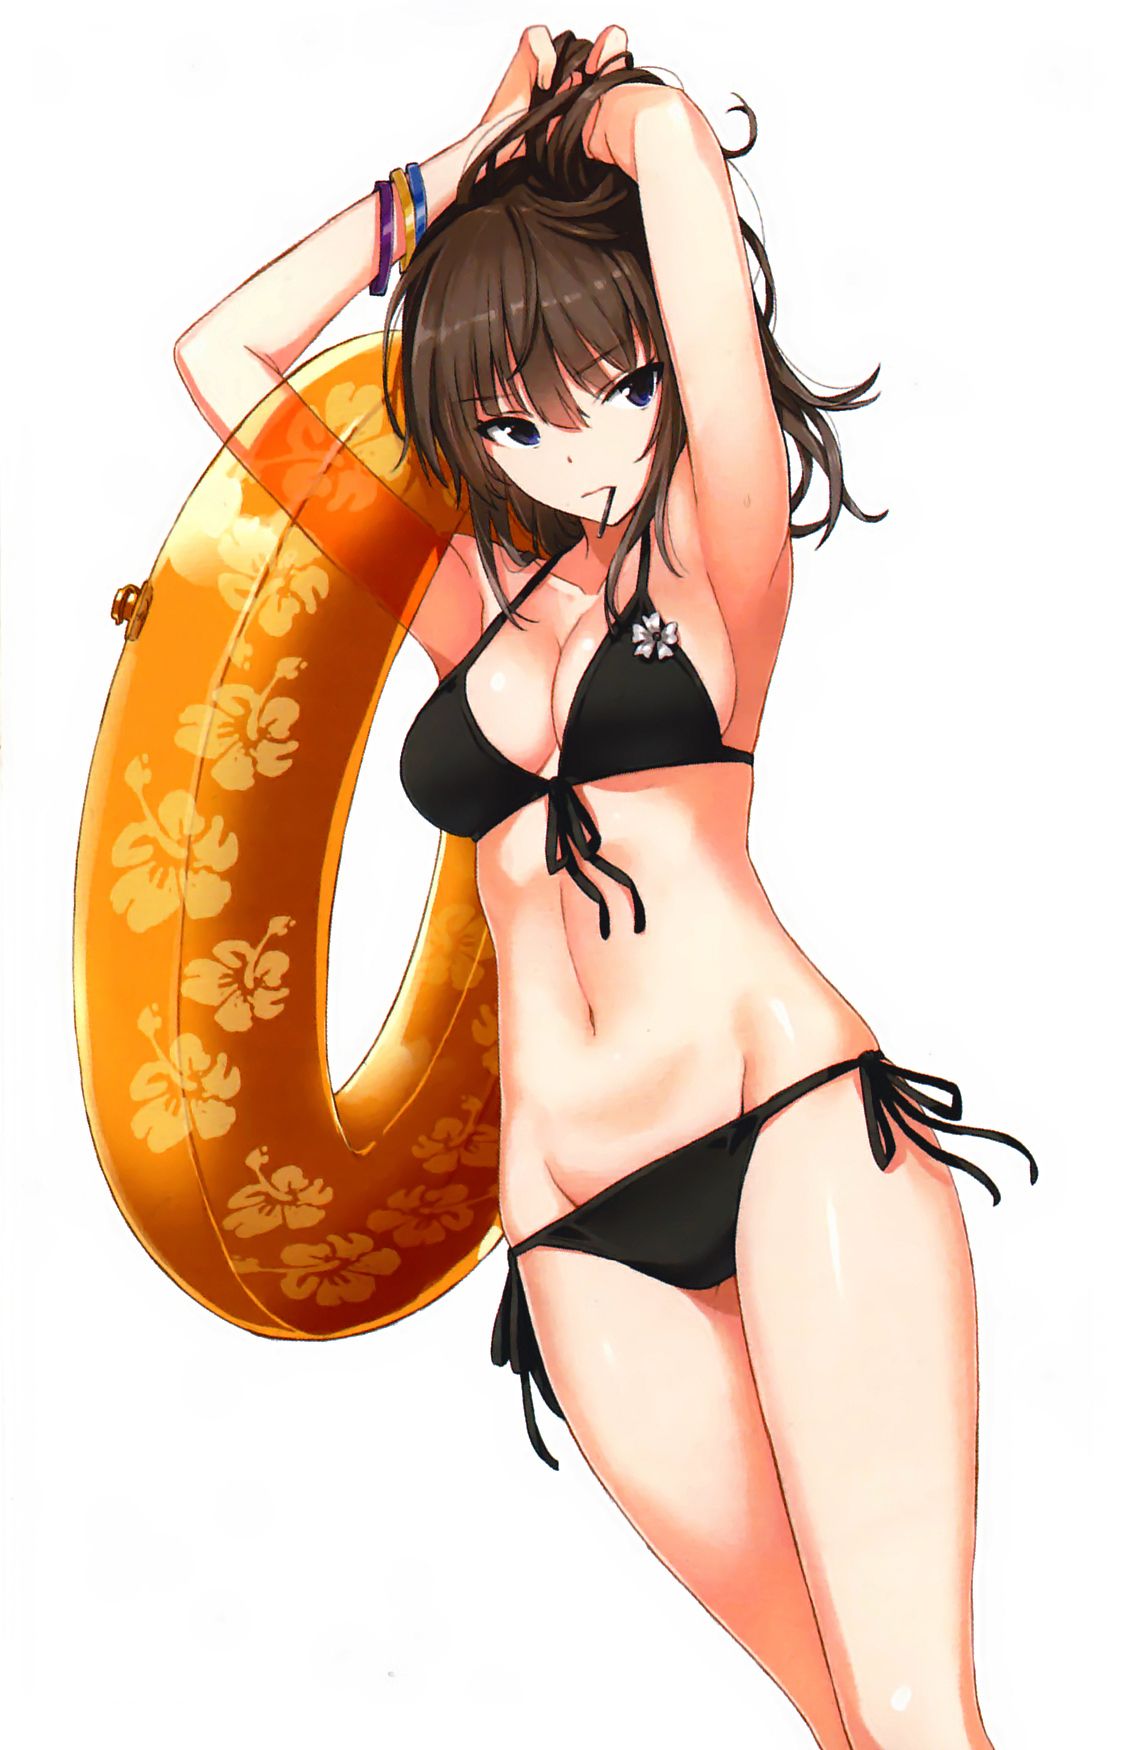 Swimsuit girl cloth area too little!!! Take a picture please 1